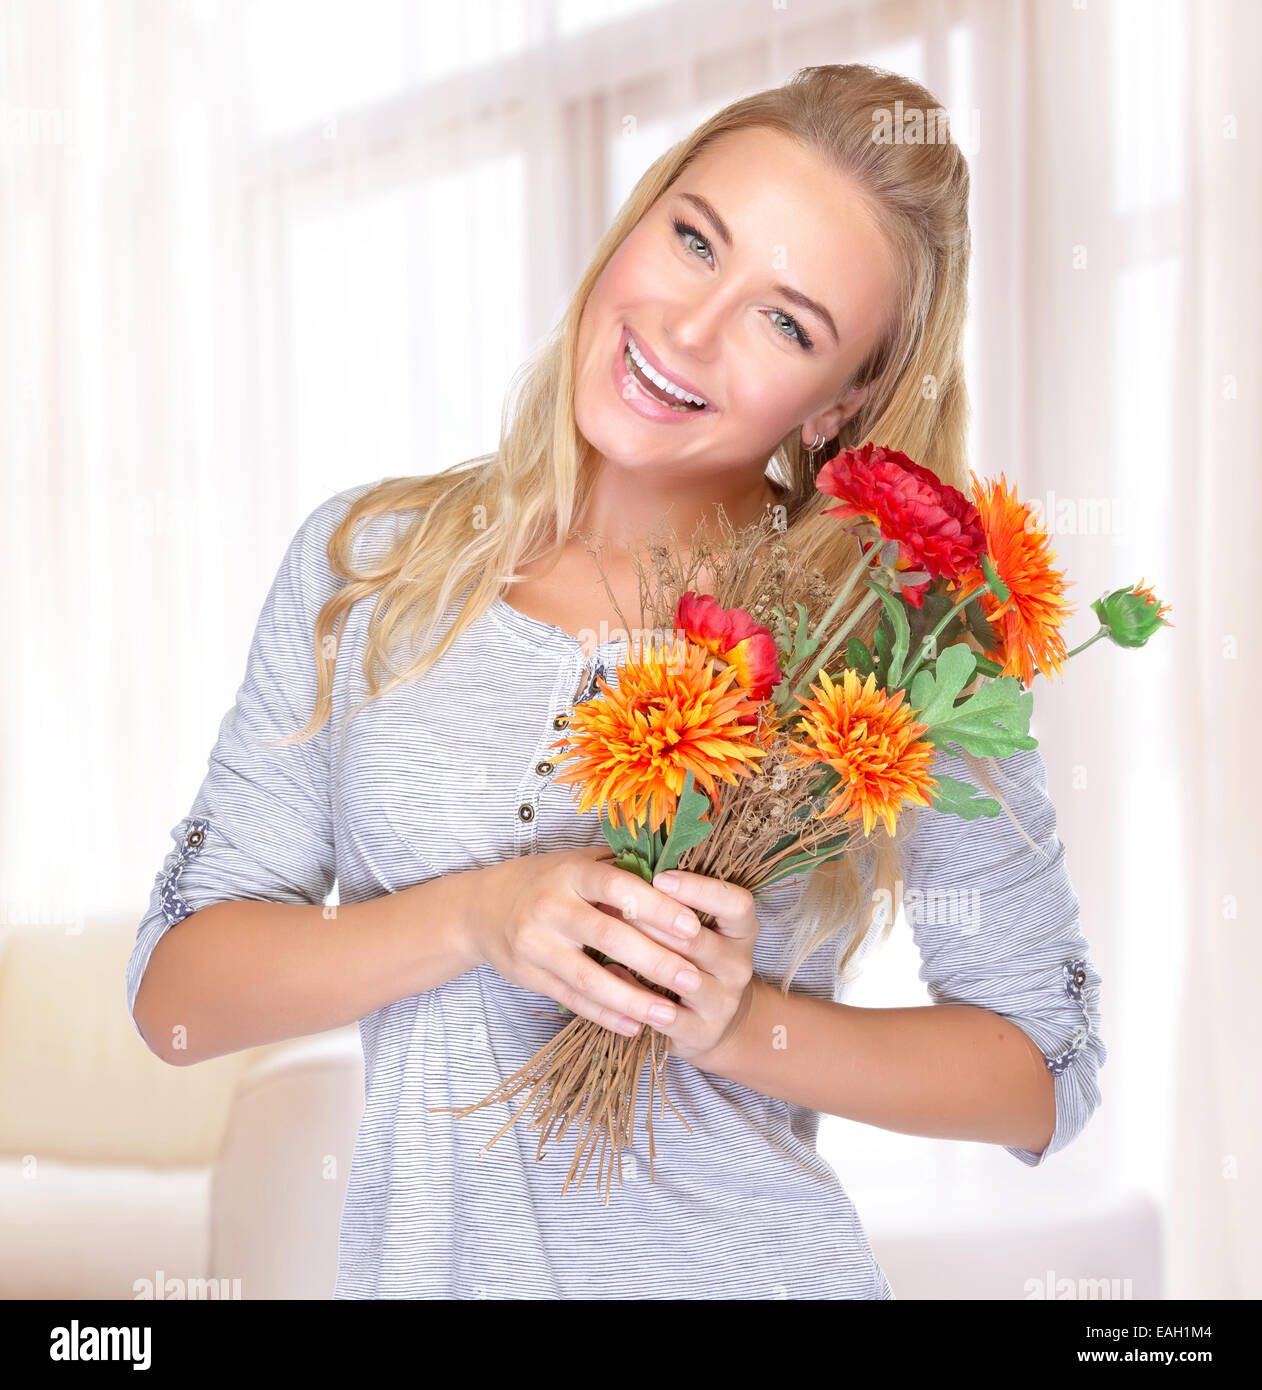 Portrait of cheerful smiling female with flowers bouquet in hands, spending autumn holiday at home, enjoying cute present Stock Photo